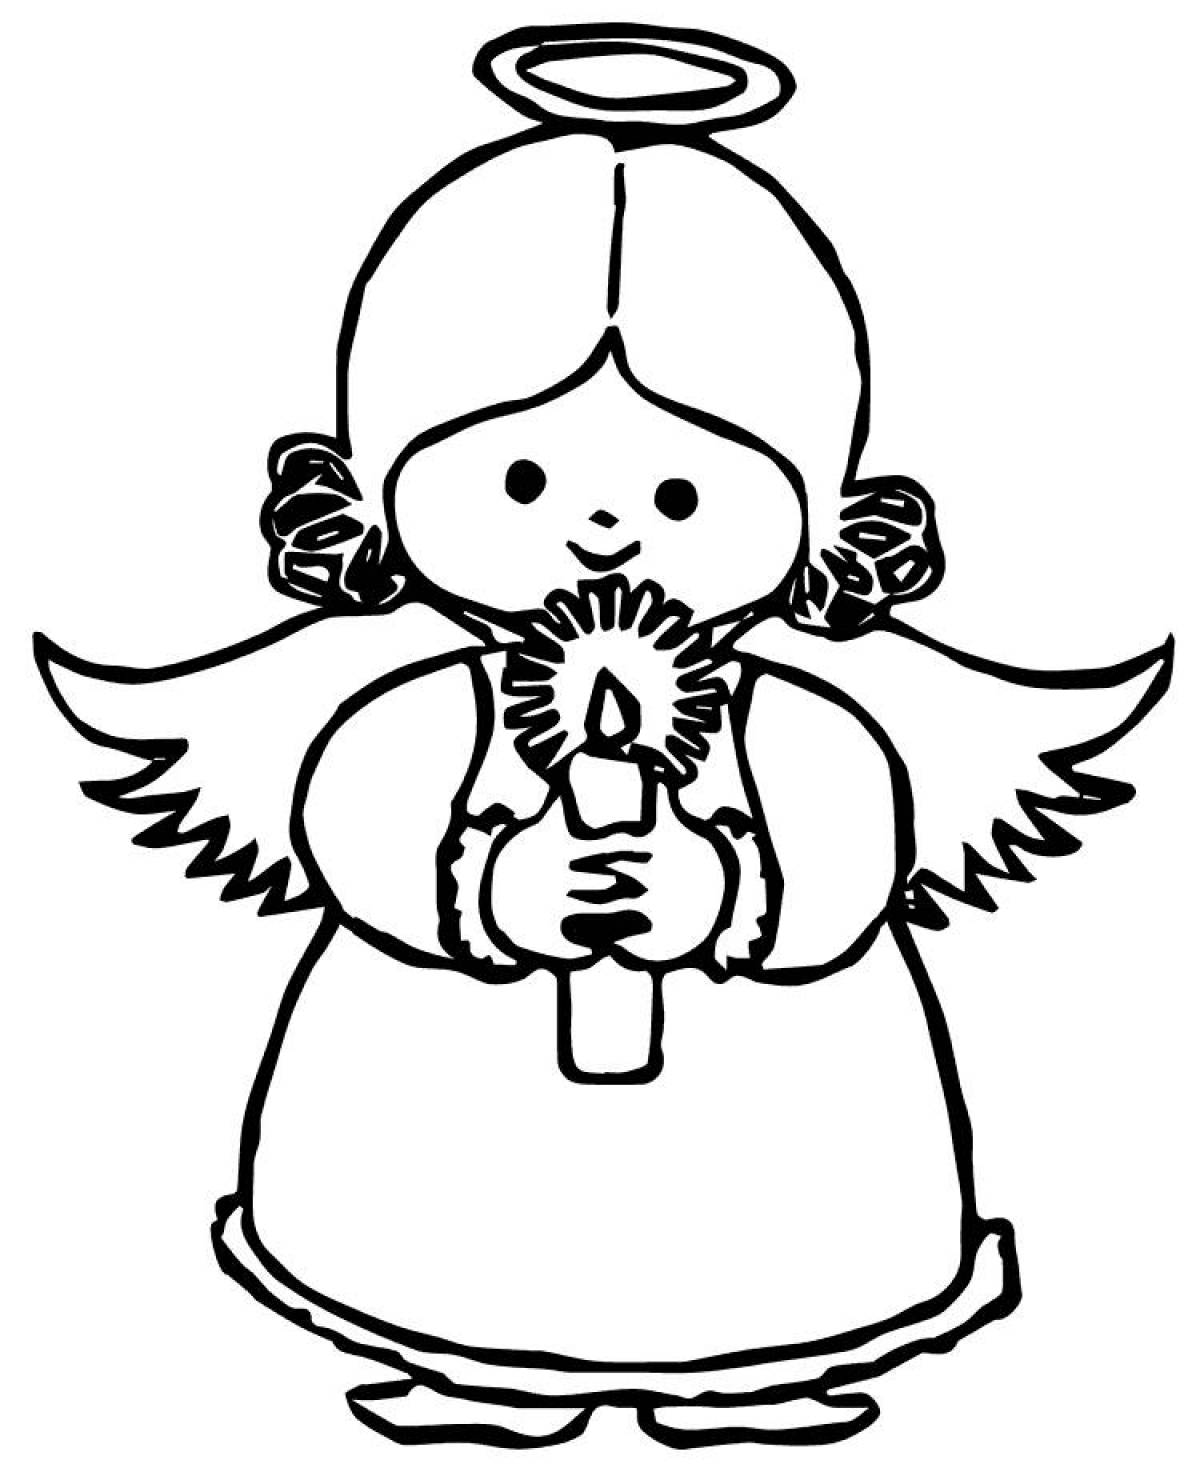 Glorious christmas angel coloring page